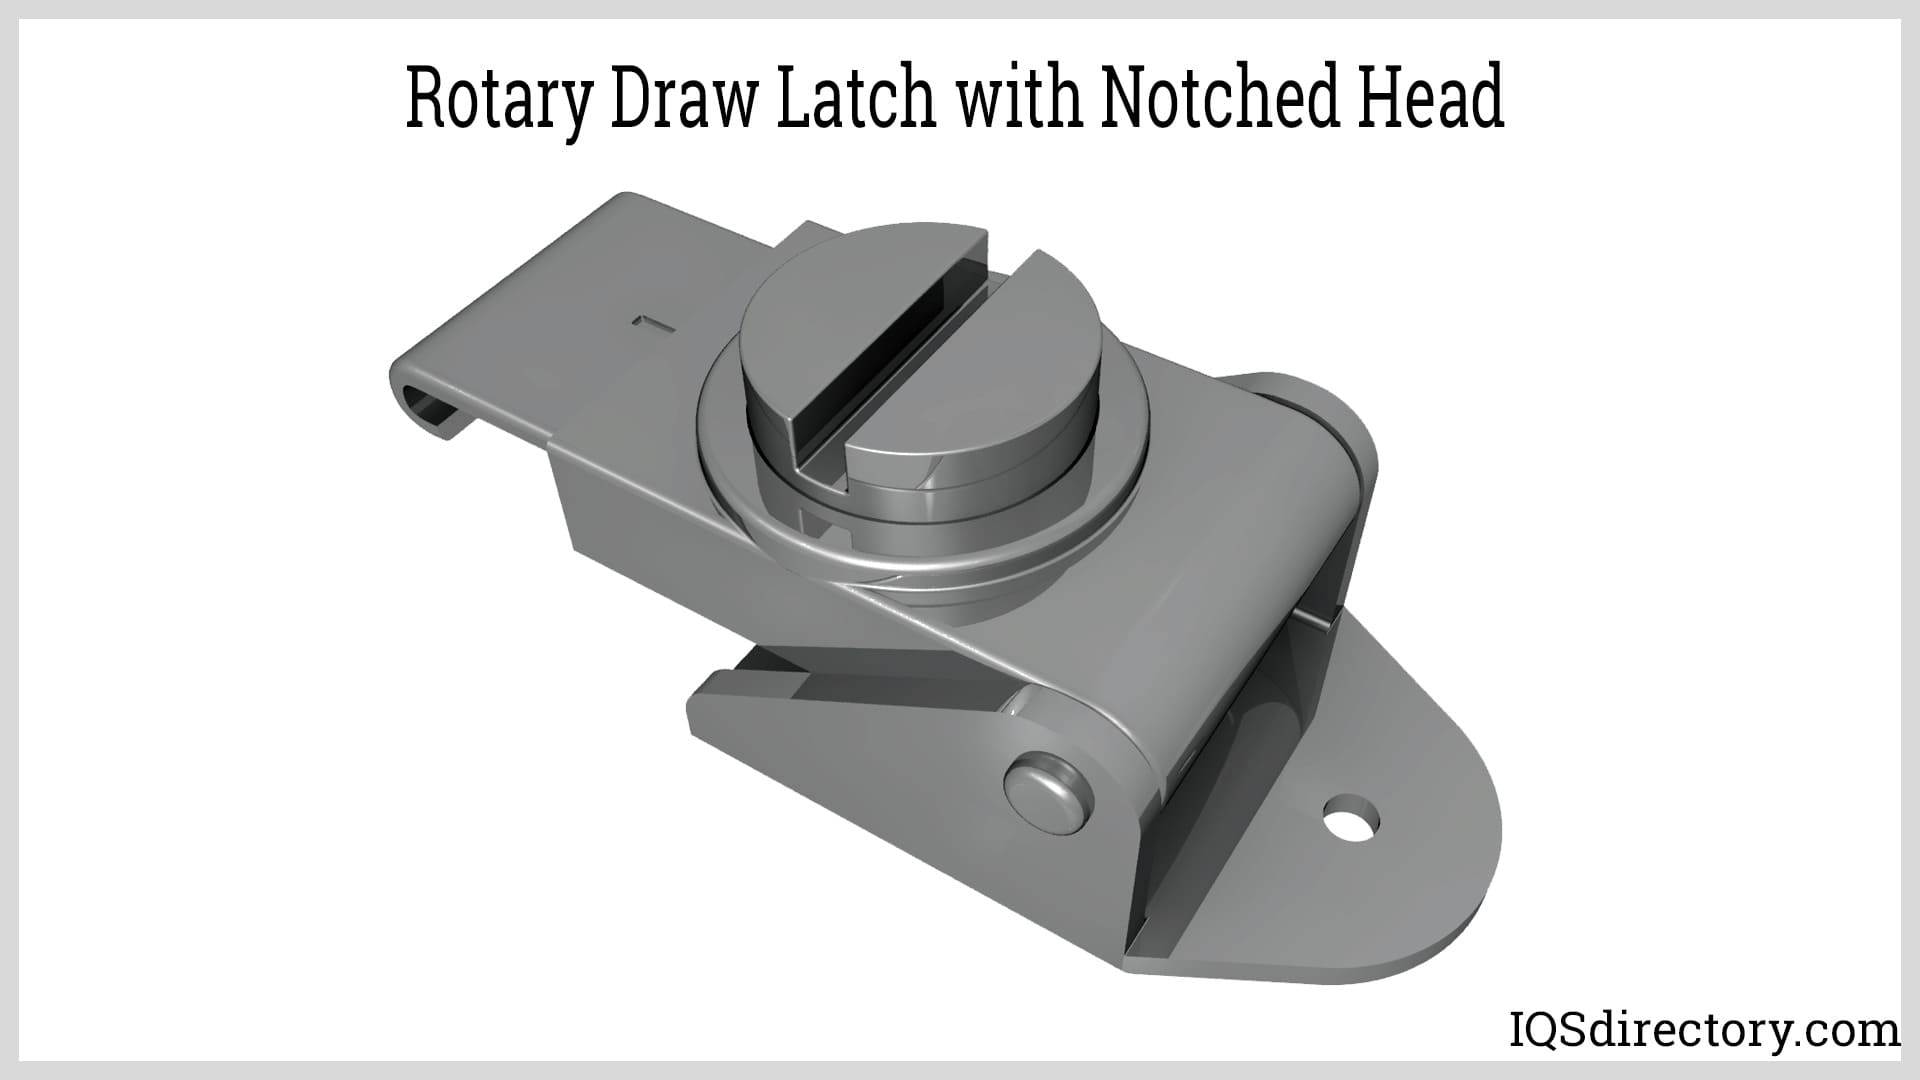 Rotary Draw Latch with Notched Head